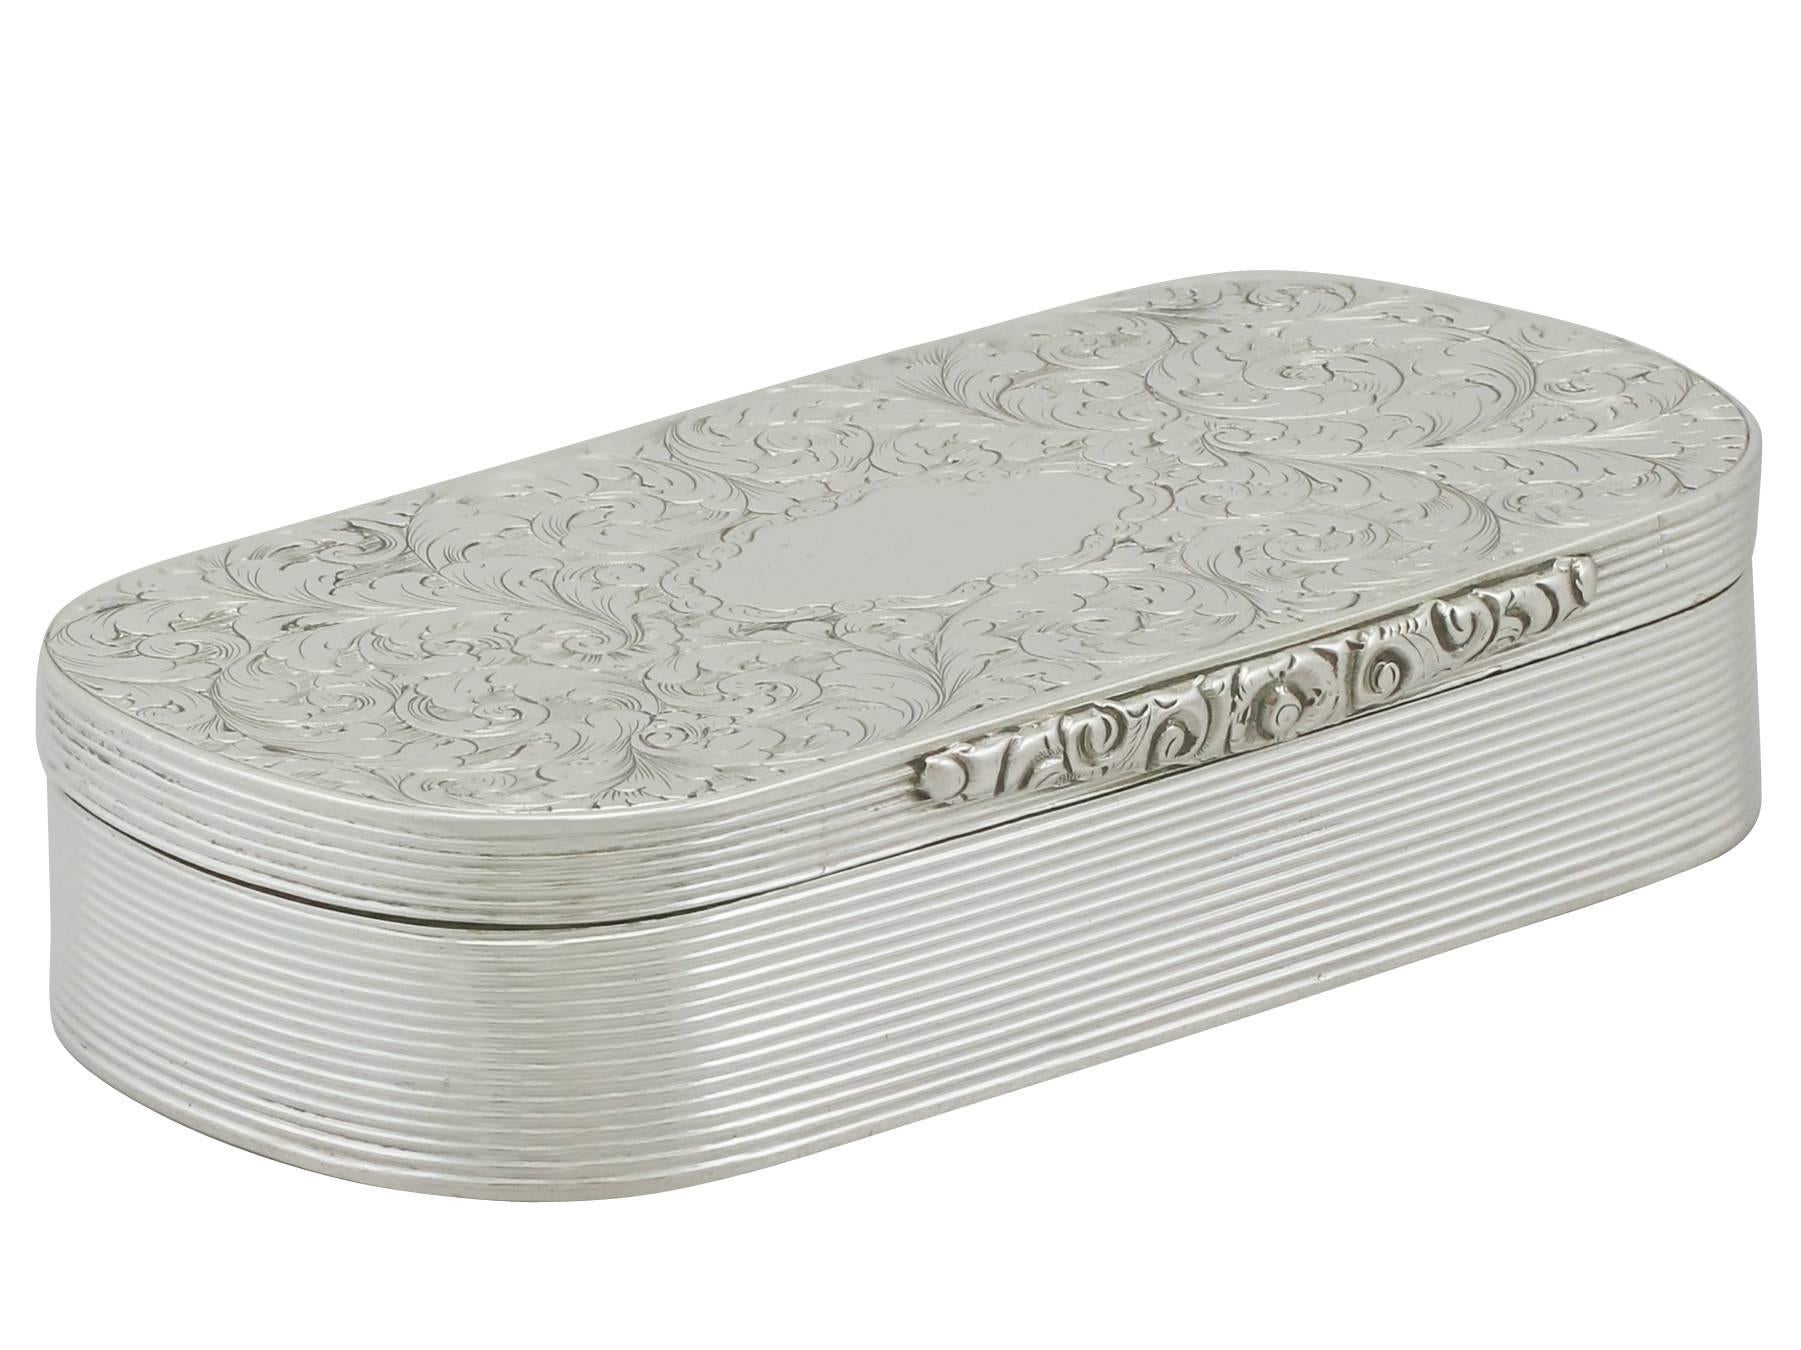 antique sterling silver box